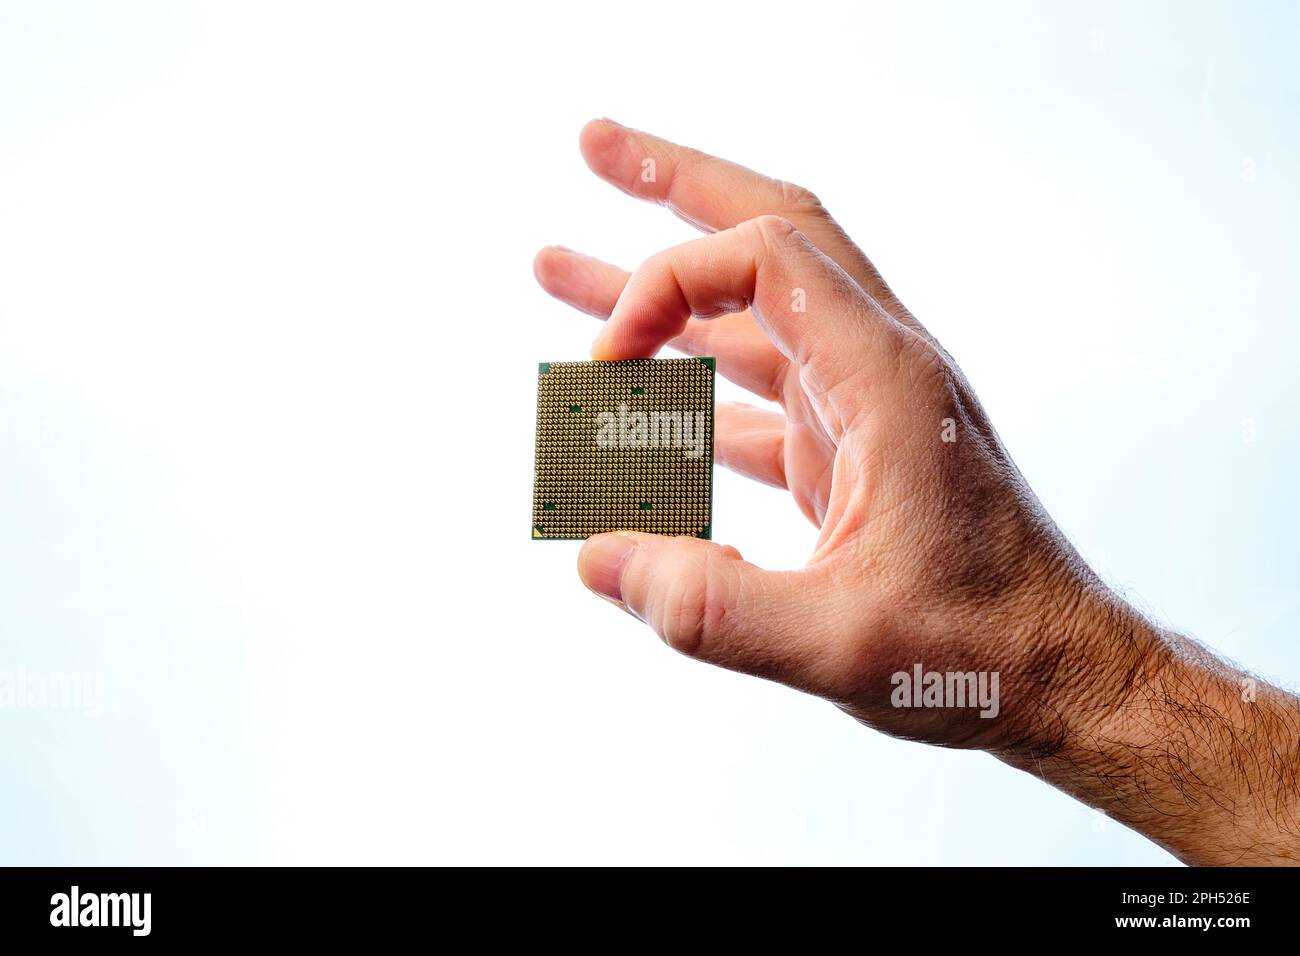 Man's hand holding a microchip with two fingers on a white background. Stock Photo